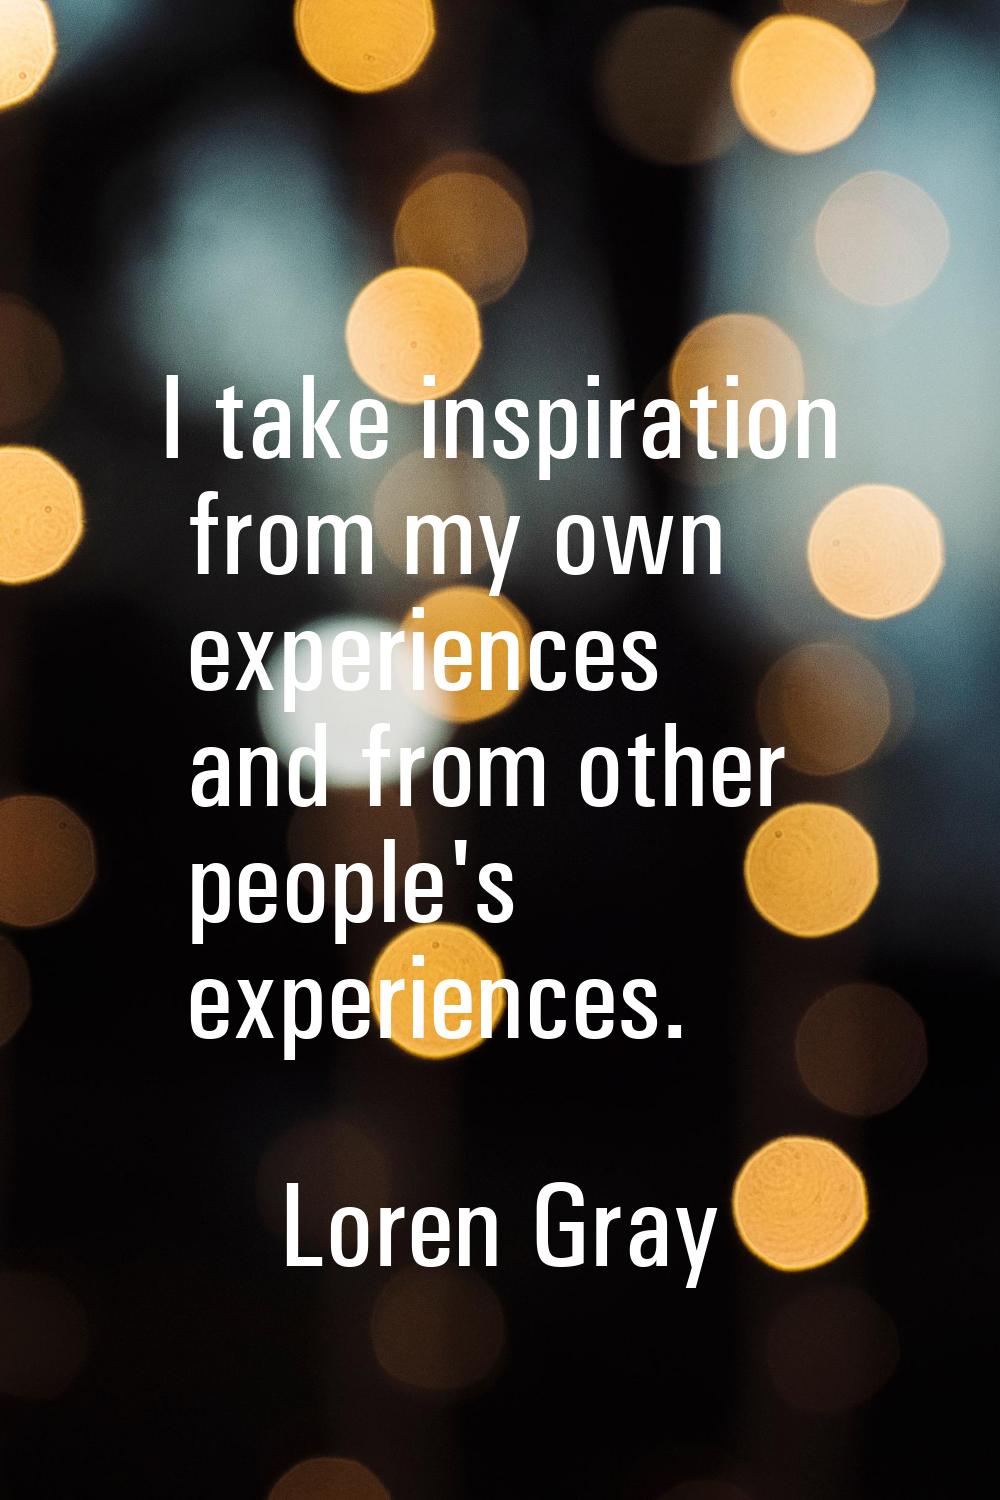 I take inspiration from my own experiences and from other people's experiences.